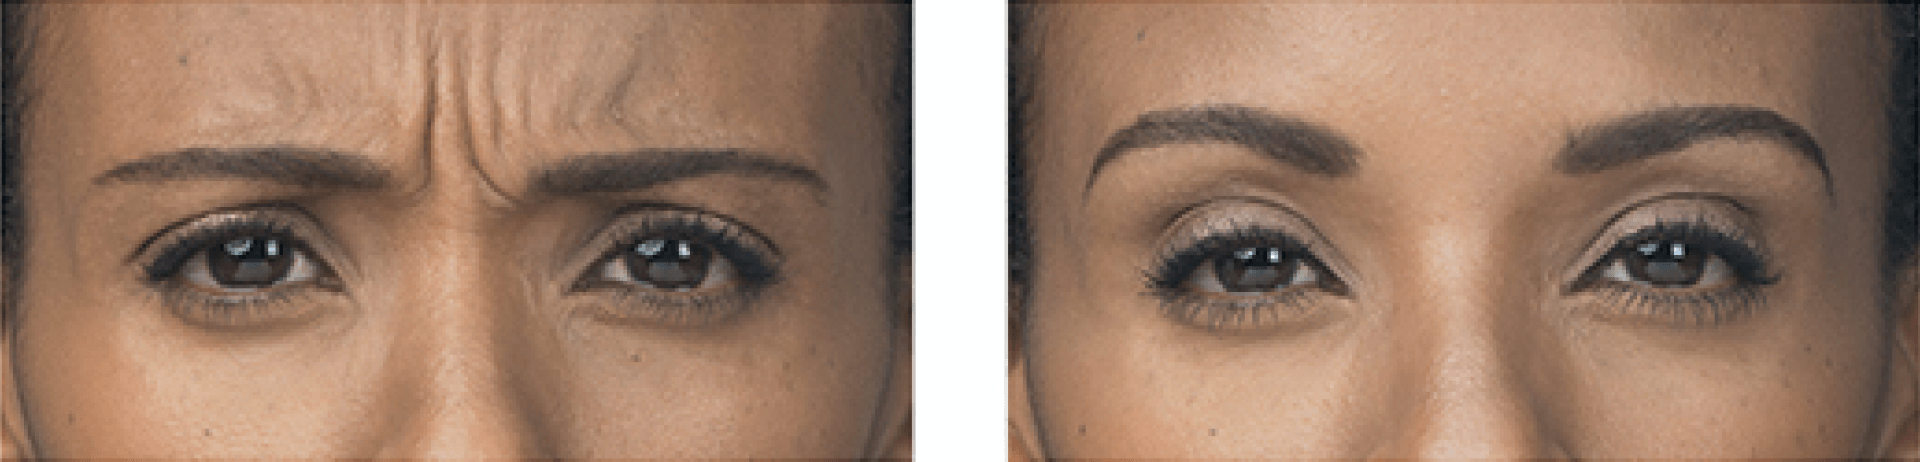 patient before and after BOTOX treatment